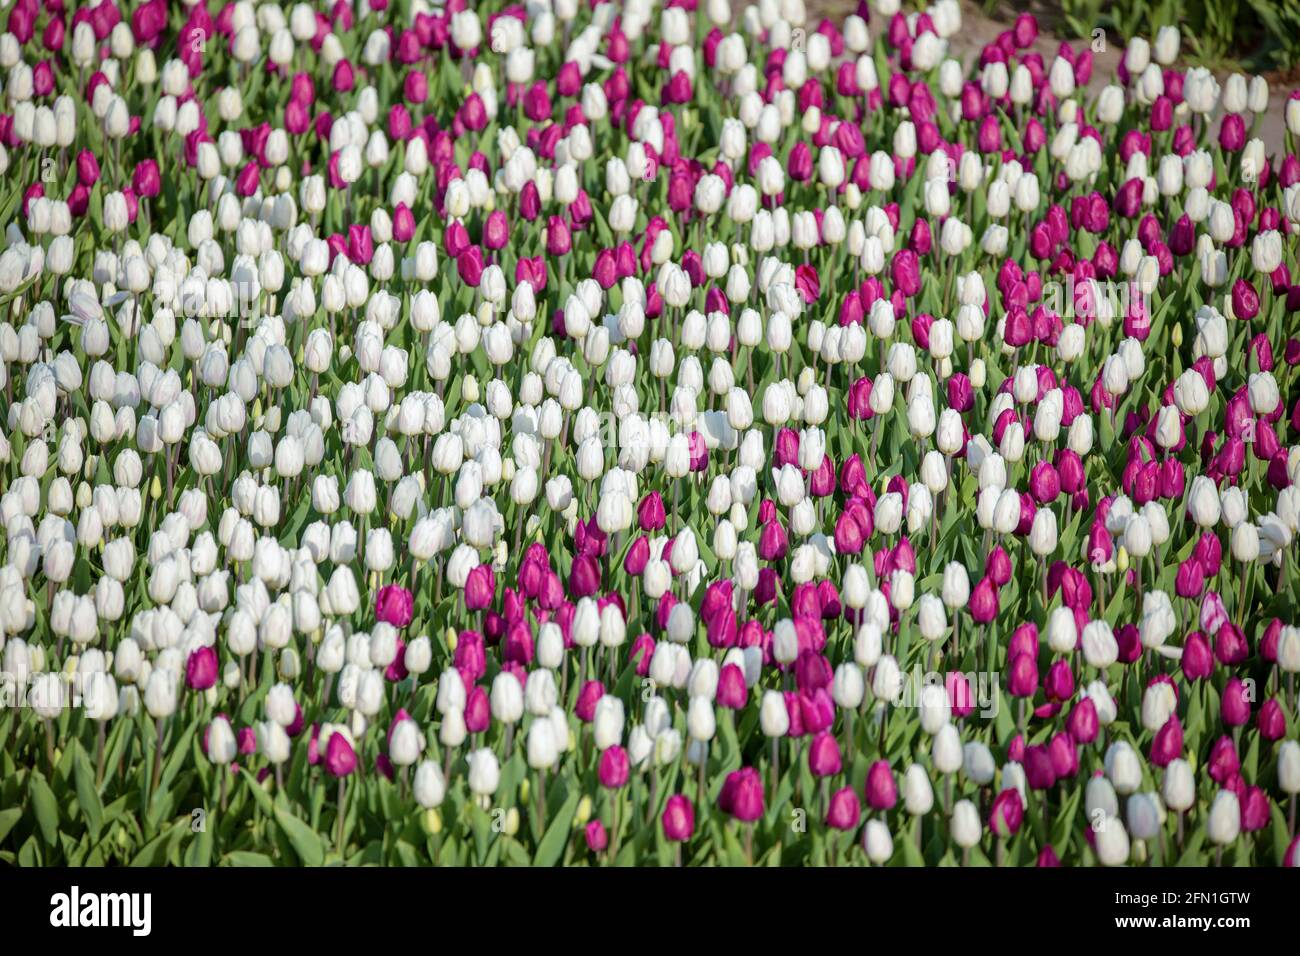 Blooming fields of tulips on a flowerbed, flowers of different colors Stock Photo